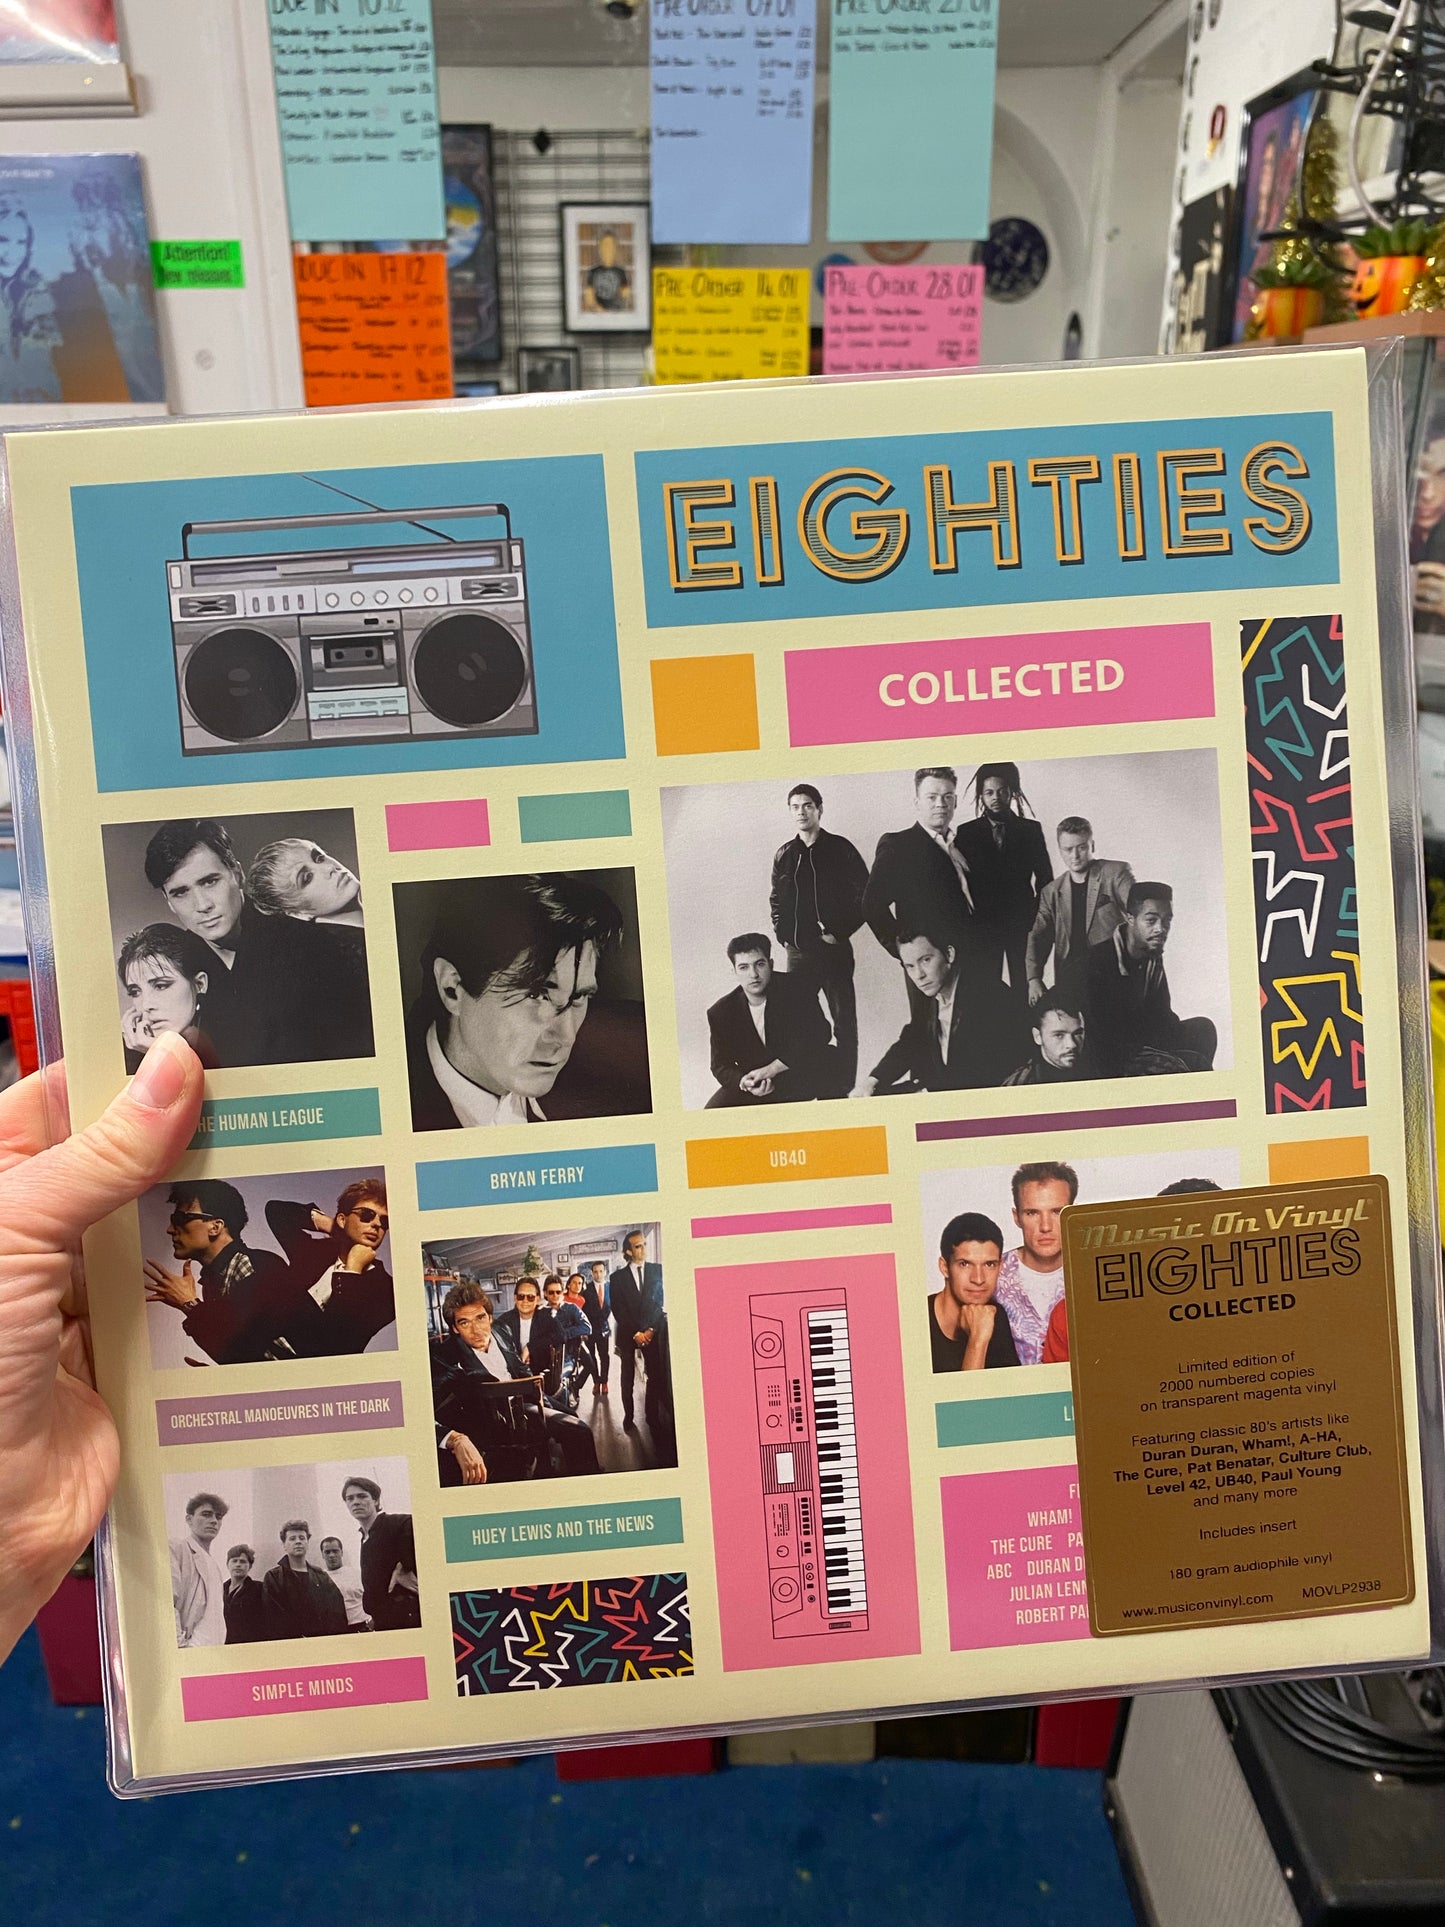 EIGHTIES COLLECTED 2LP NUMBERED LIMITED EDITION MAGENTA VINYL RECORD (12.11.21)